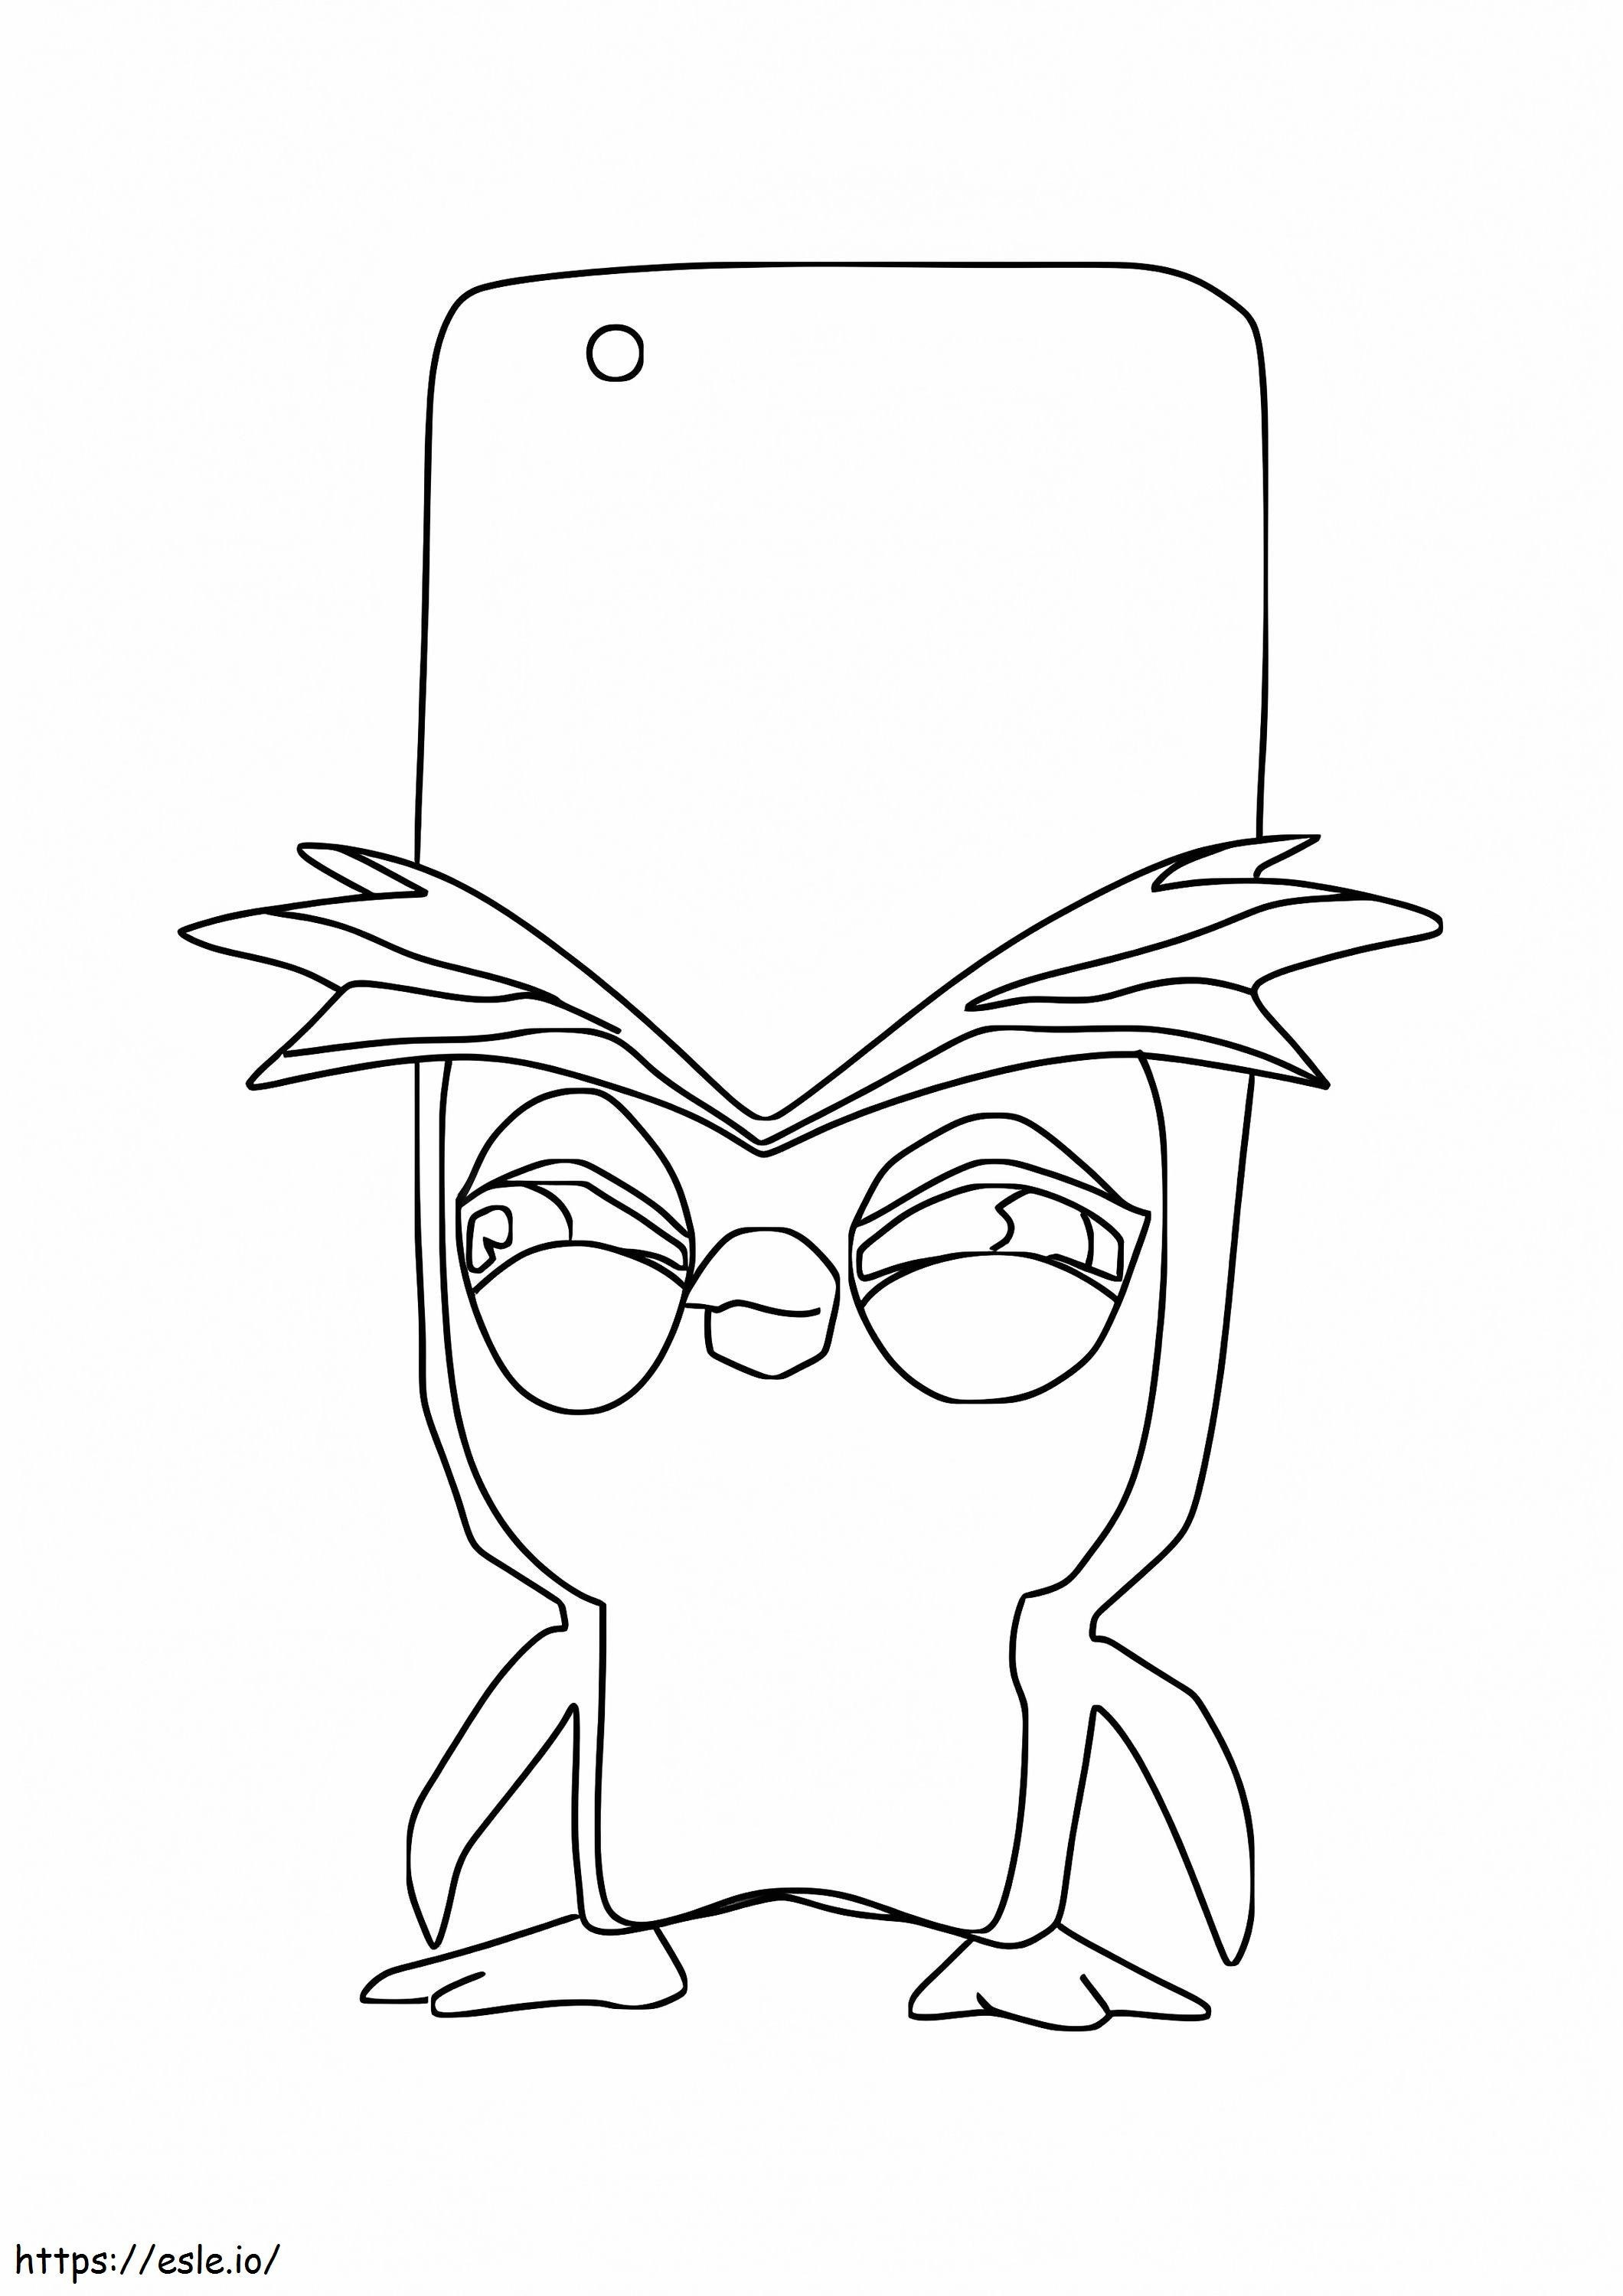 Zooba Fuzzy Penguin coloring page